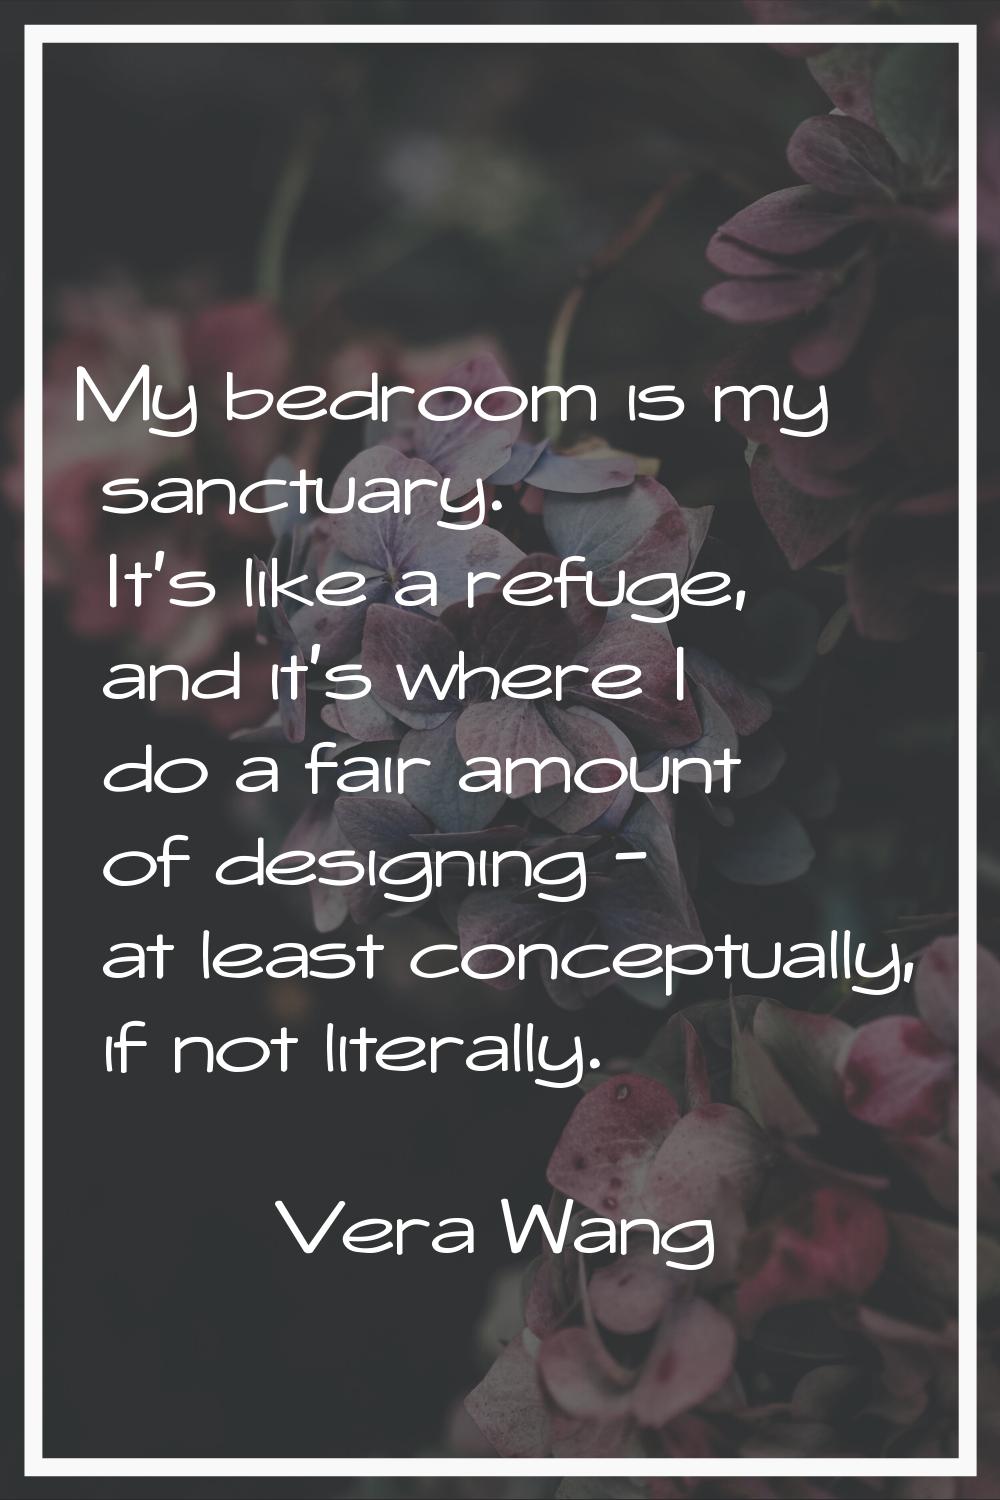 My bedroom is my sanctuary. It's like a refuge, and it's where I do a fair amount of designing - at